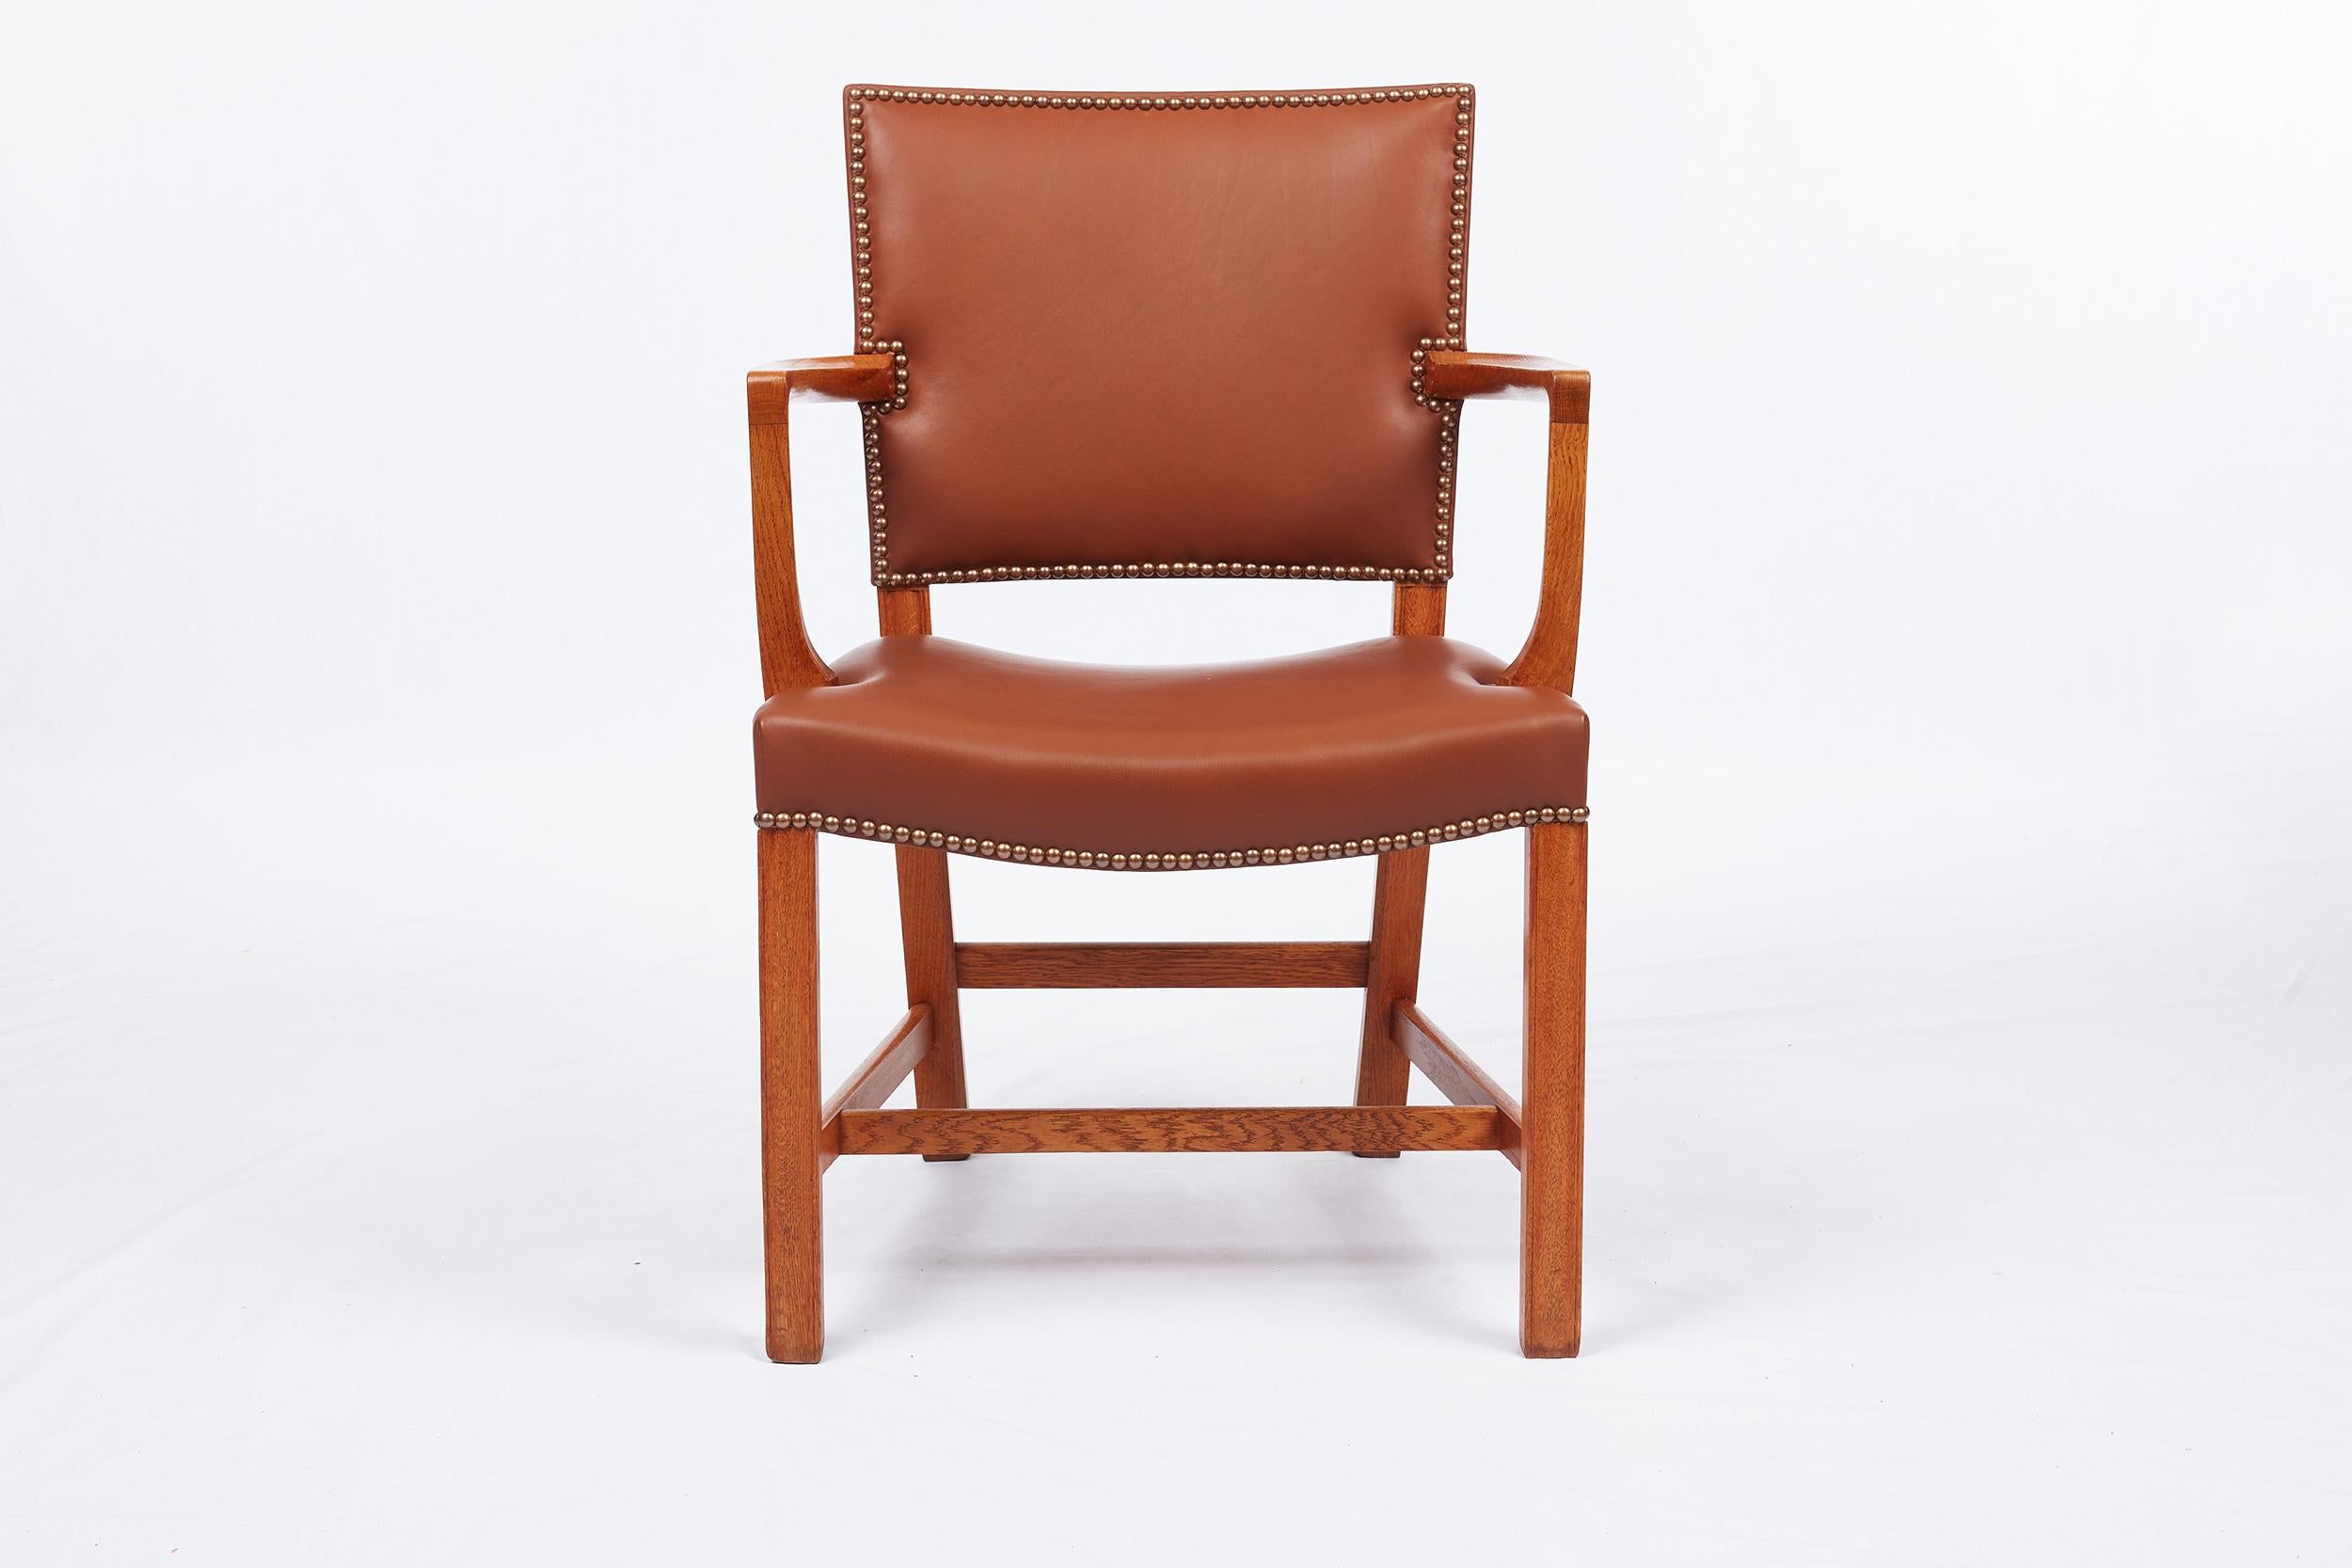 Pair of Kaare Klint armchairs Designed In 1927 And Produced By Rud Rasmussen.